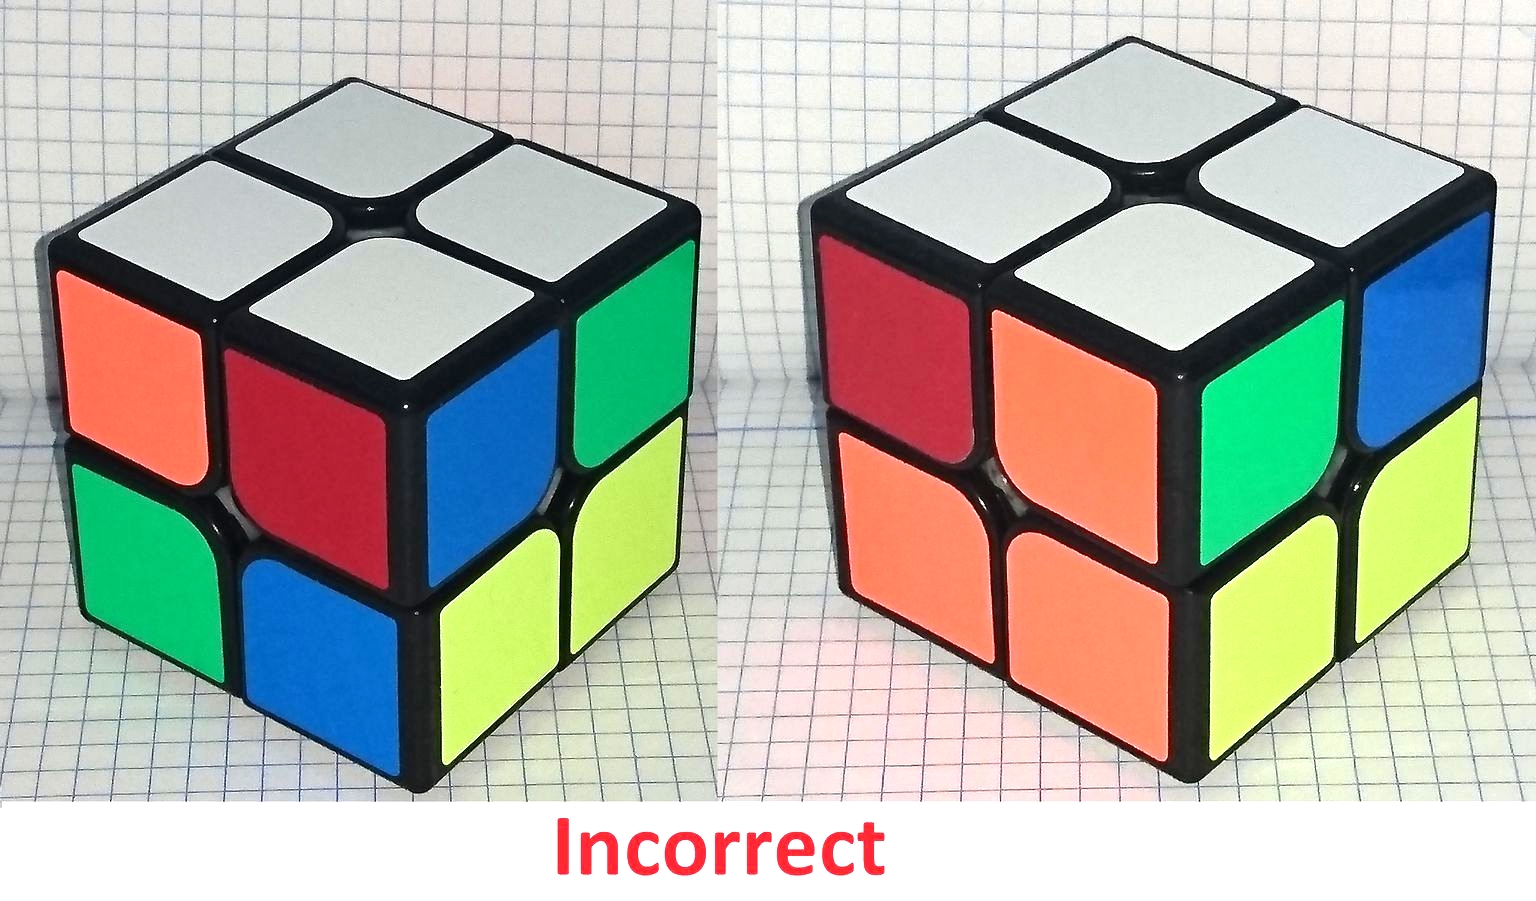 Z Extremely simple solution for 2x2 Rubik's Cube just one algorithm